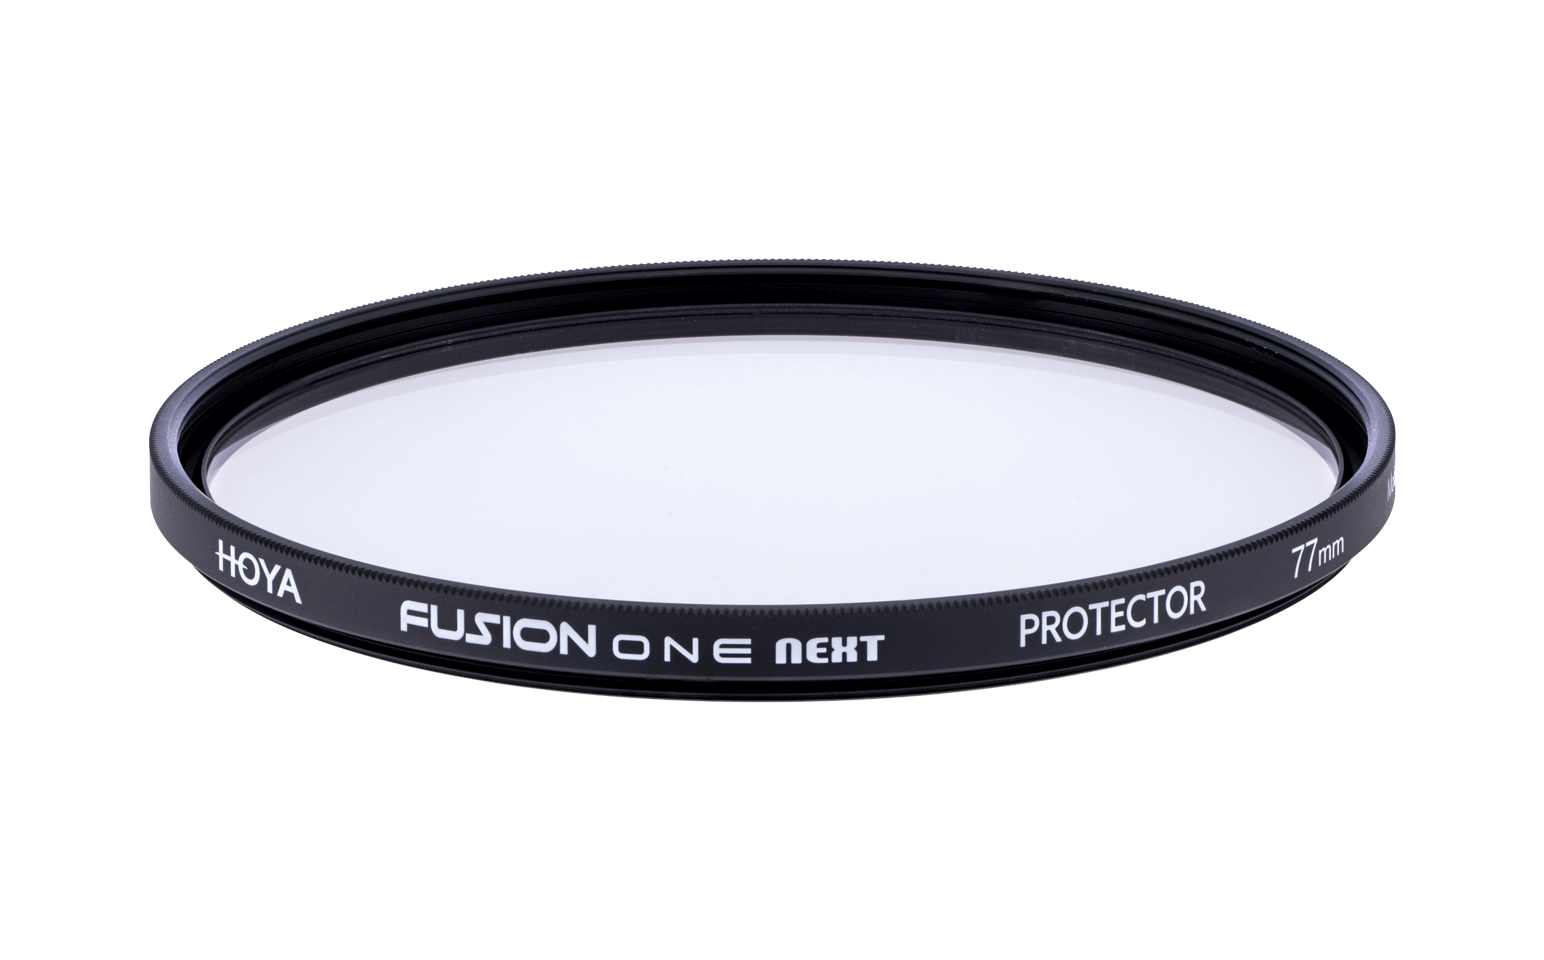 HOYA Fusion ONE Next Protector Filter